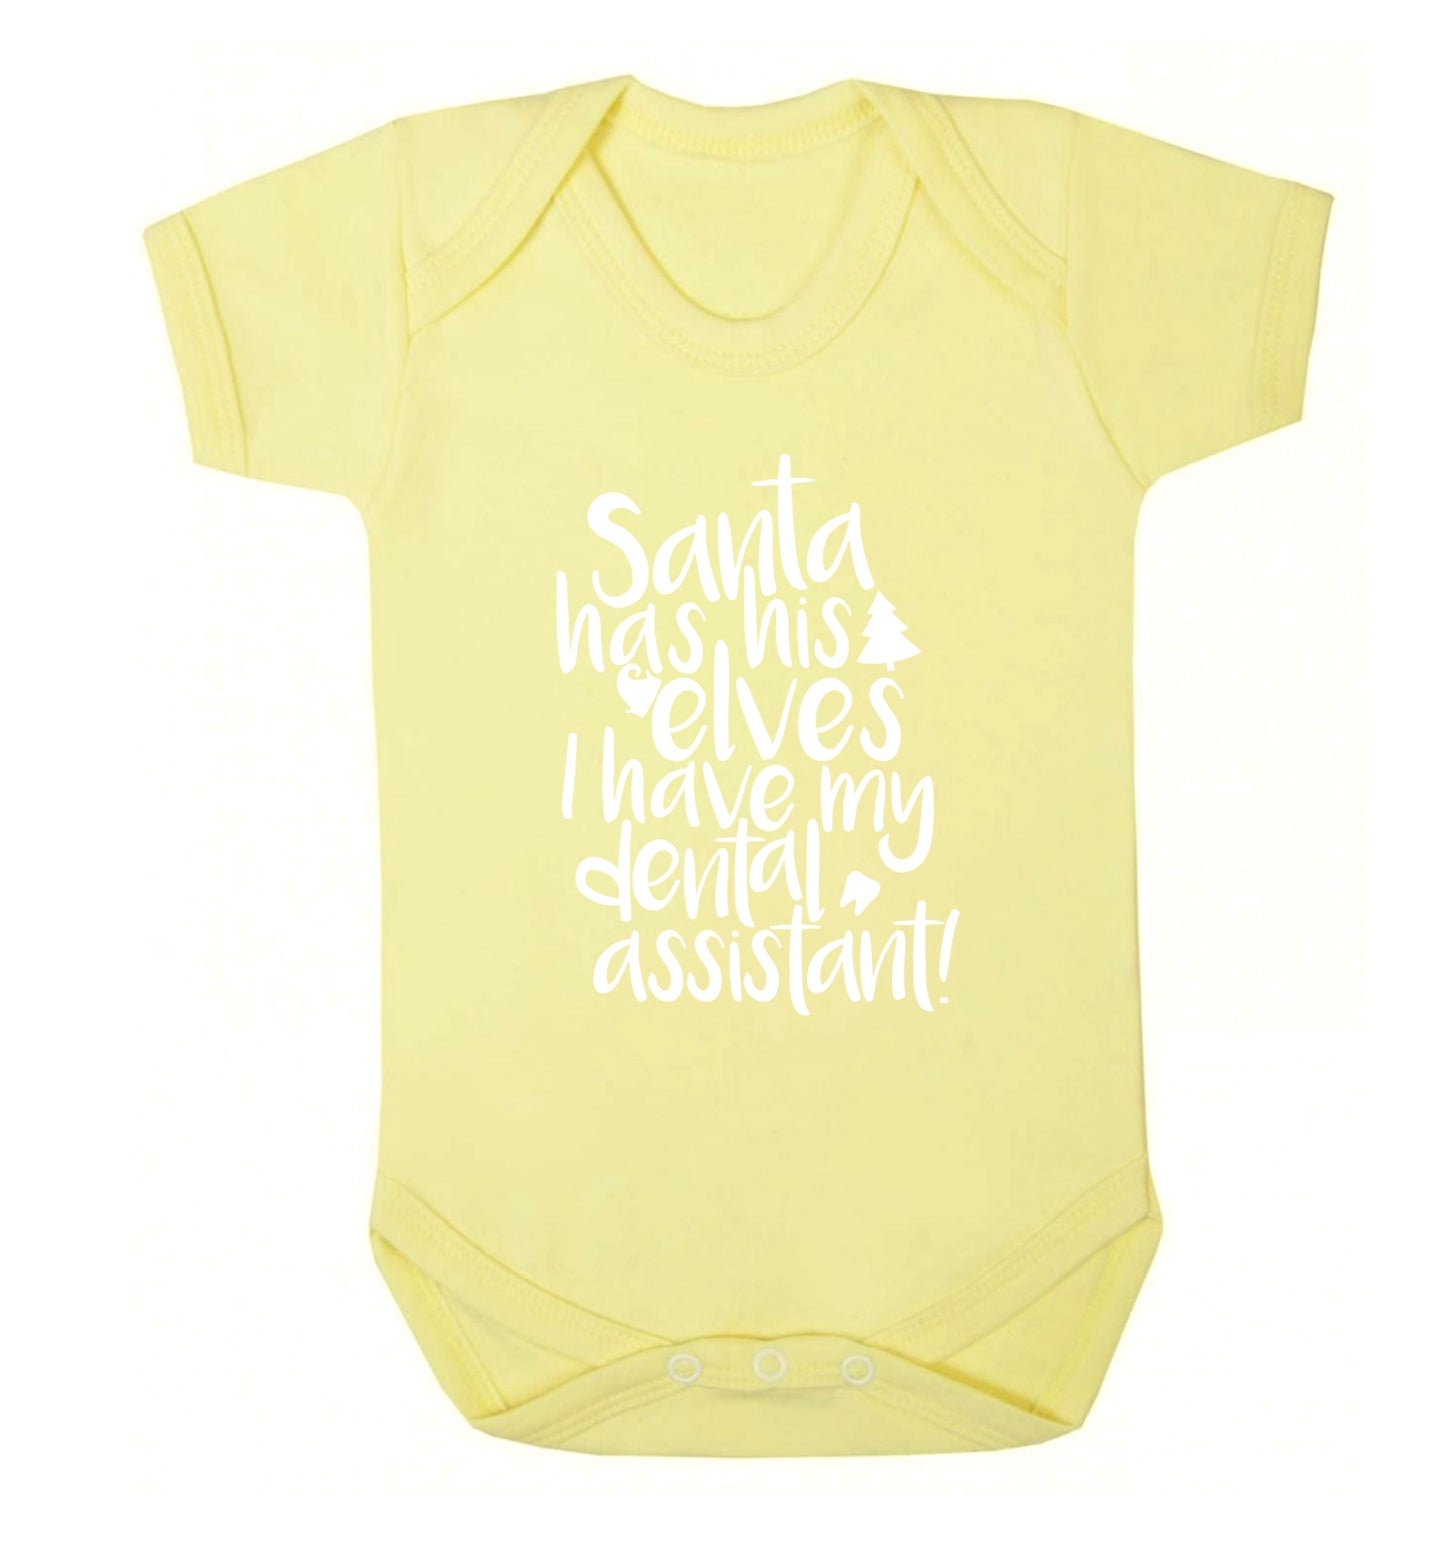 Santa has his elves I have my dental assistant Baby Vest pale yellow 18-24 months